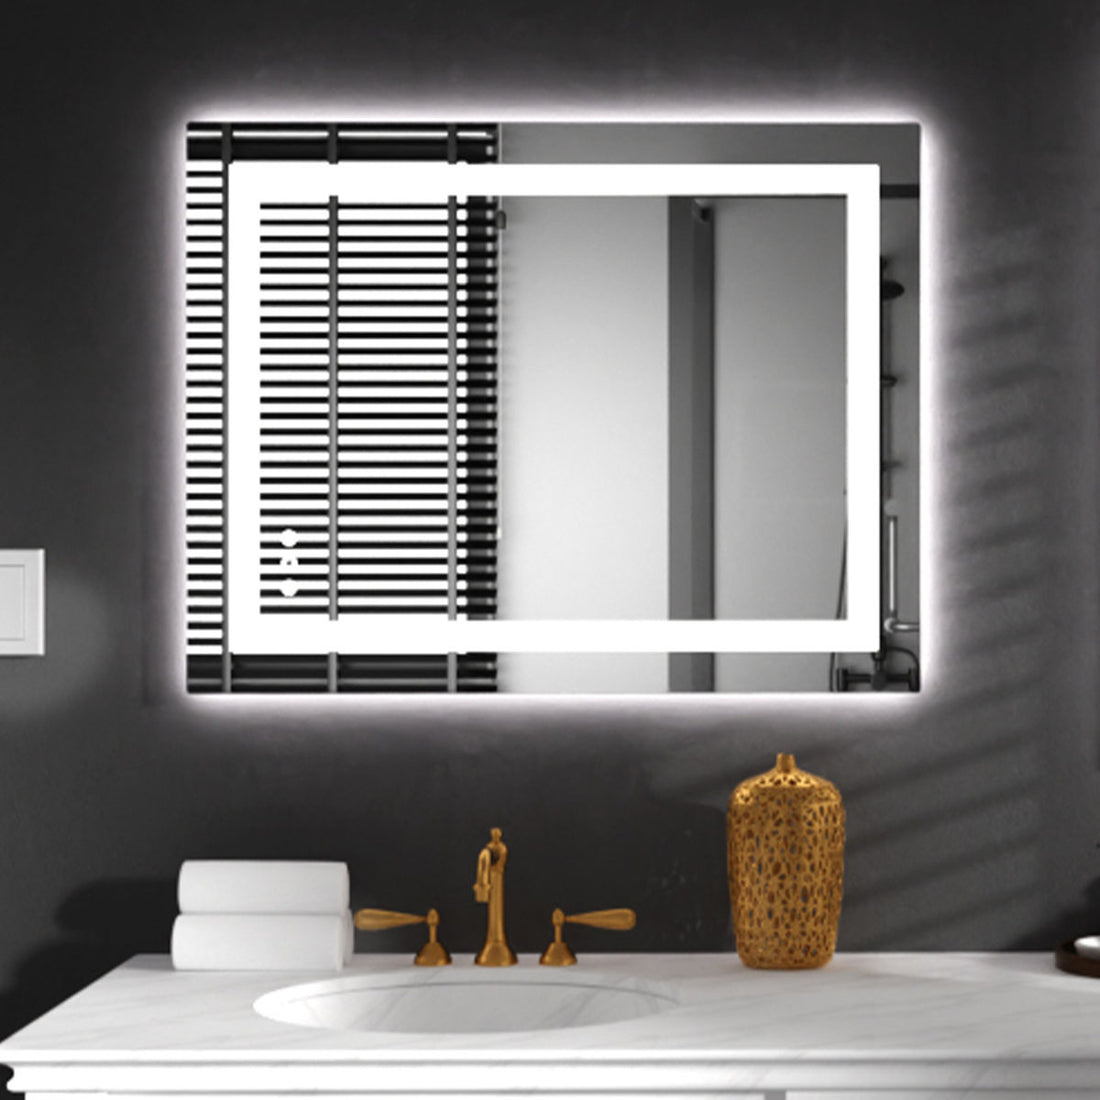 LED Mirror for Bathroom 28x36 with Lights, Anti Fog transparent-glass